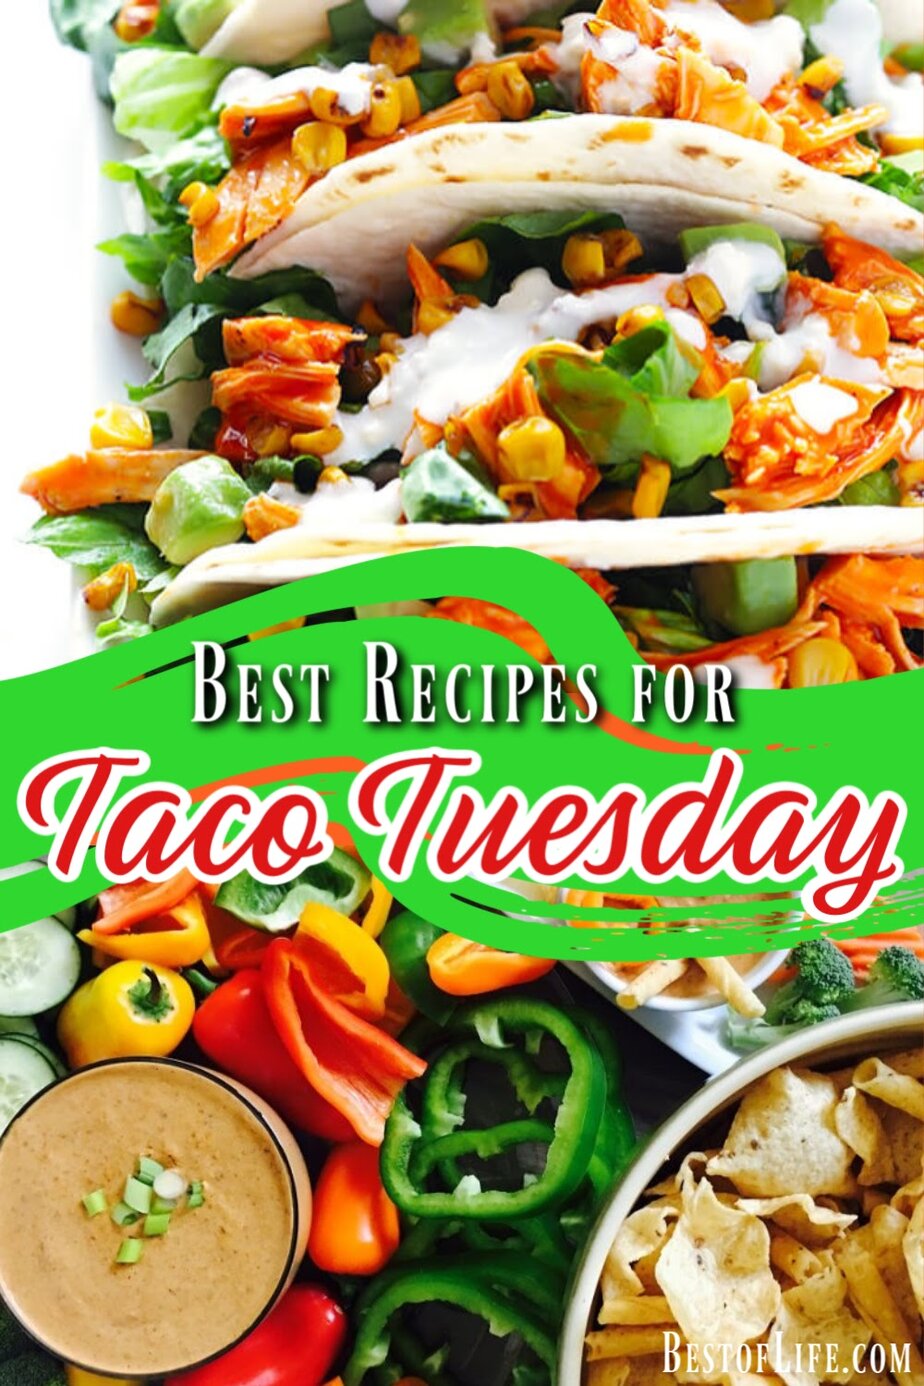 Mondays are rough. Tuesdays are better. Celebrate that every week with the best Taco Tuesday recipes. Easy Taco Recipes | Easy Margarita Recipes | Dinner Recipes | Cocktail Recipes #tacotuesday #recipes #margaritas